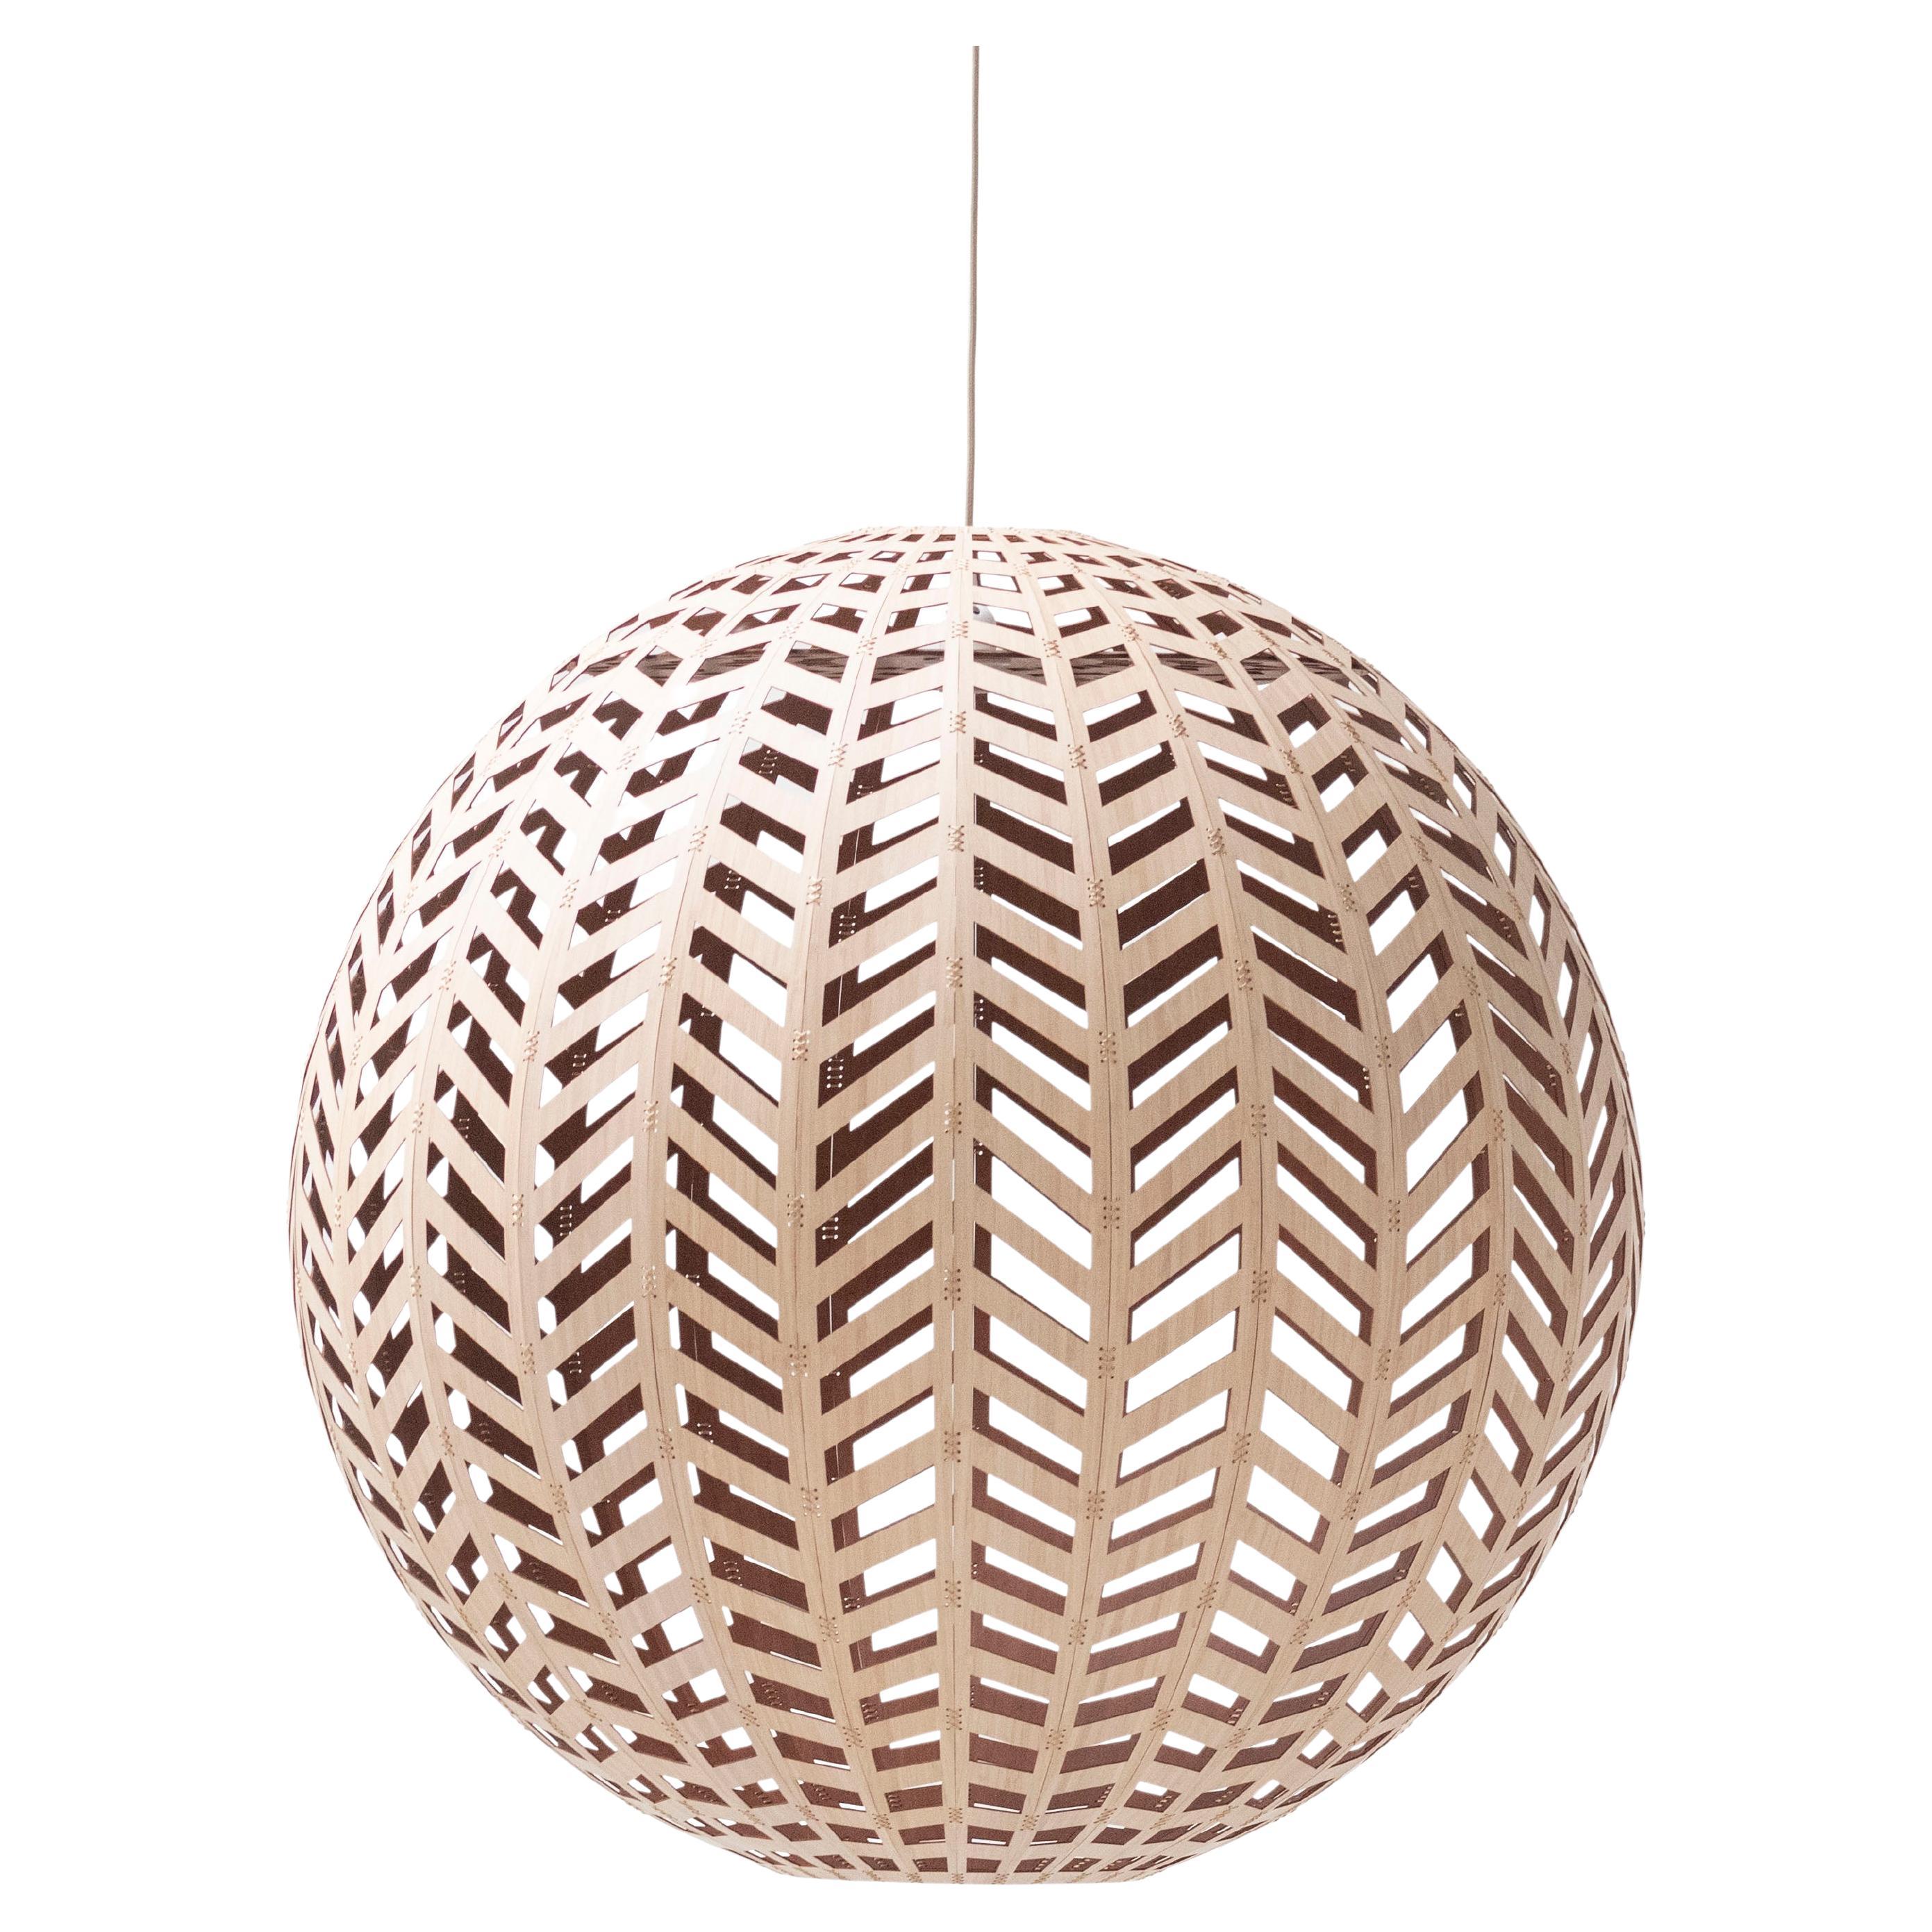 Panelitos Orb Lamp Medium by Piegatto, a Contemporary Sculptural Lamp For Sale